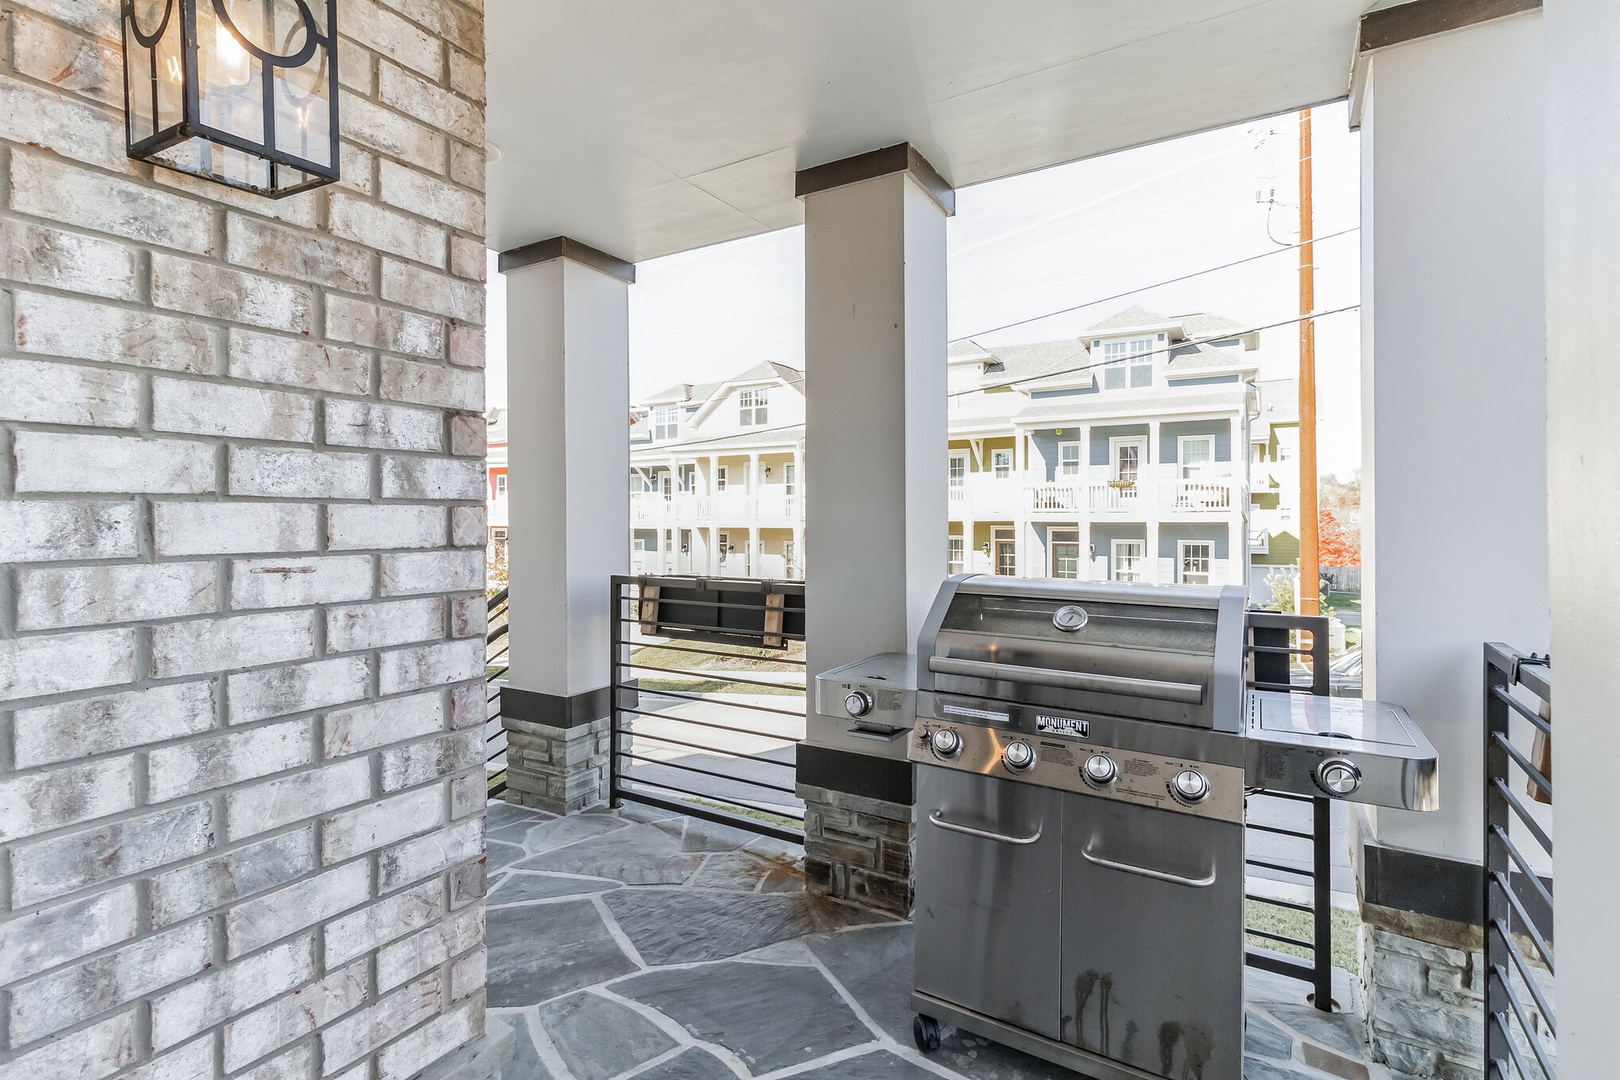 Relax on the front/side porch while you grill up a feast!